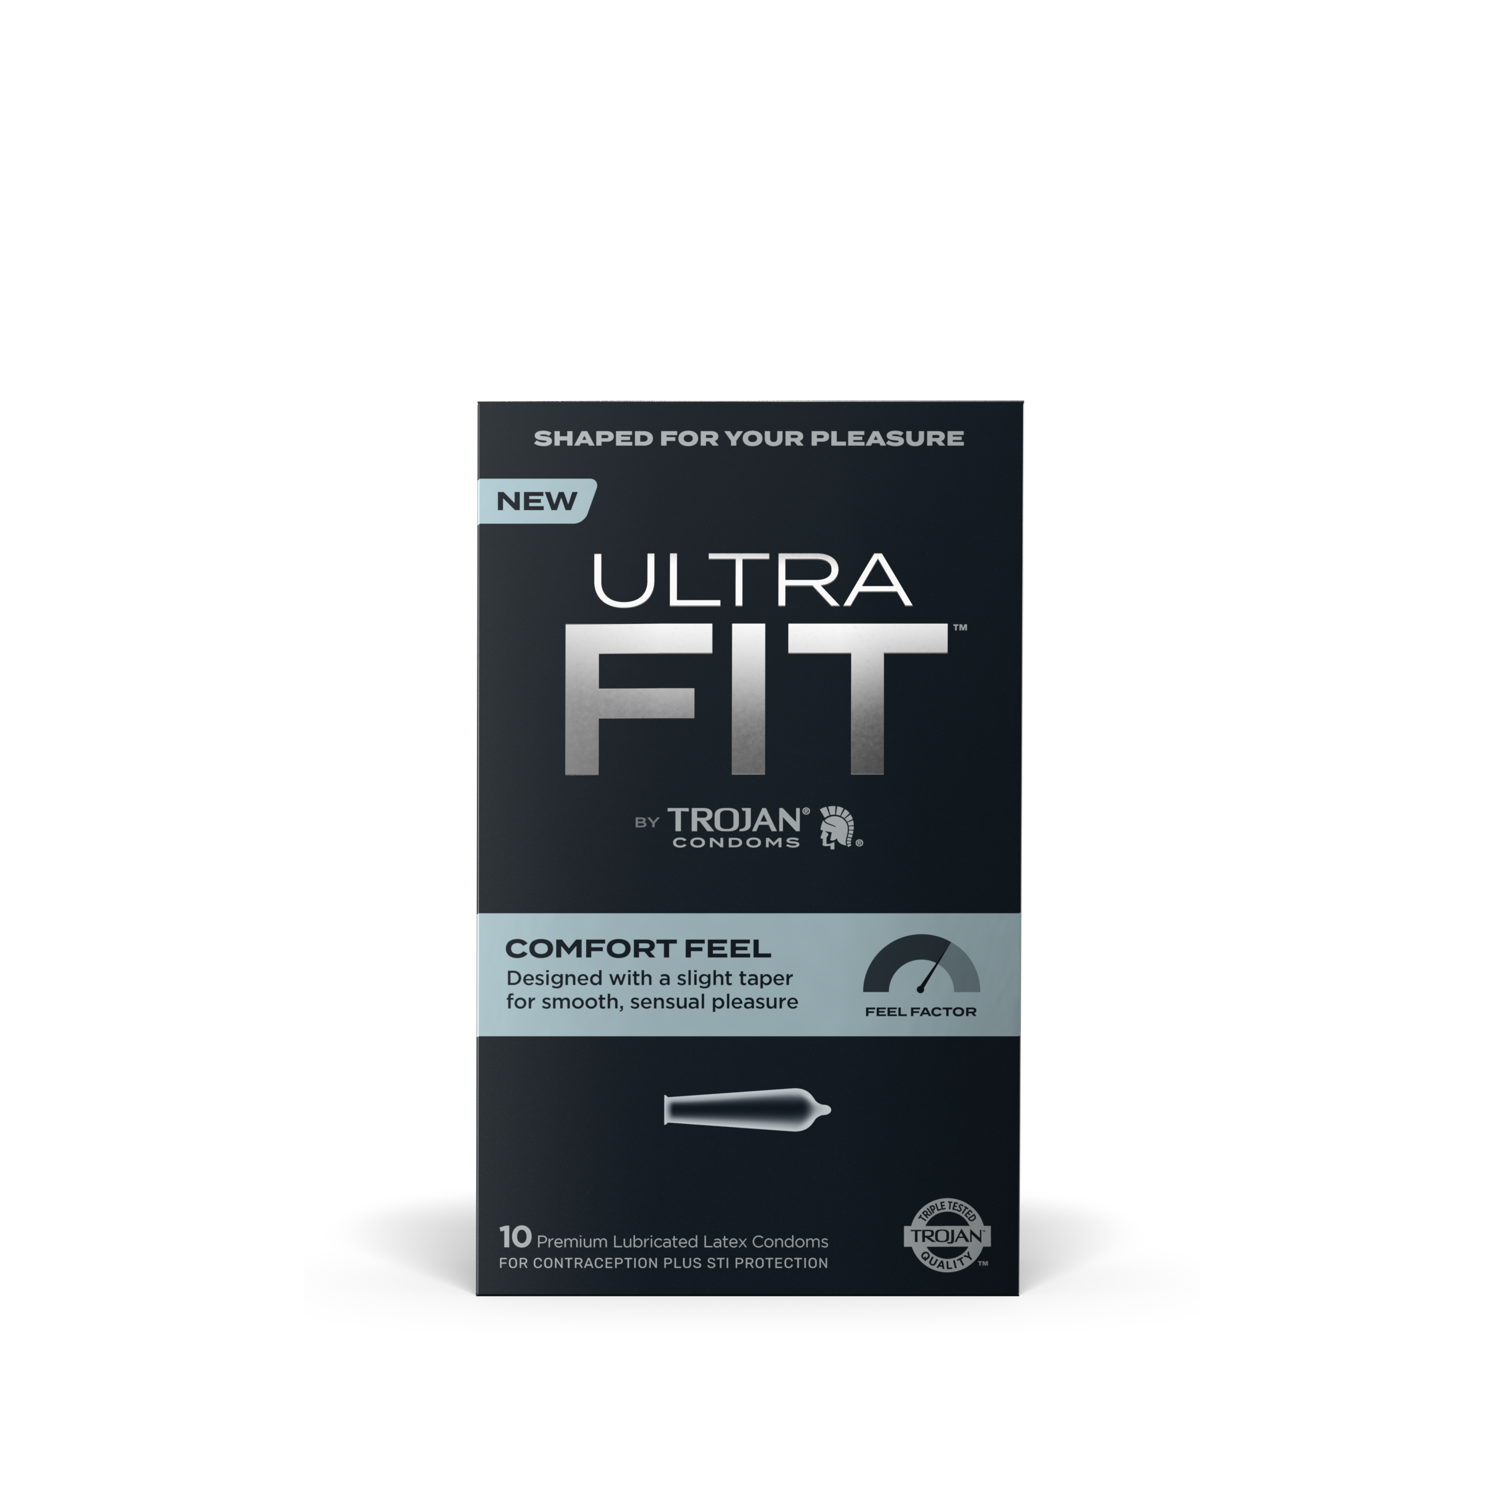 Trojan Ultra Fit Comfort Feel Condom front of package.